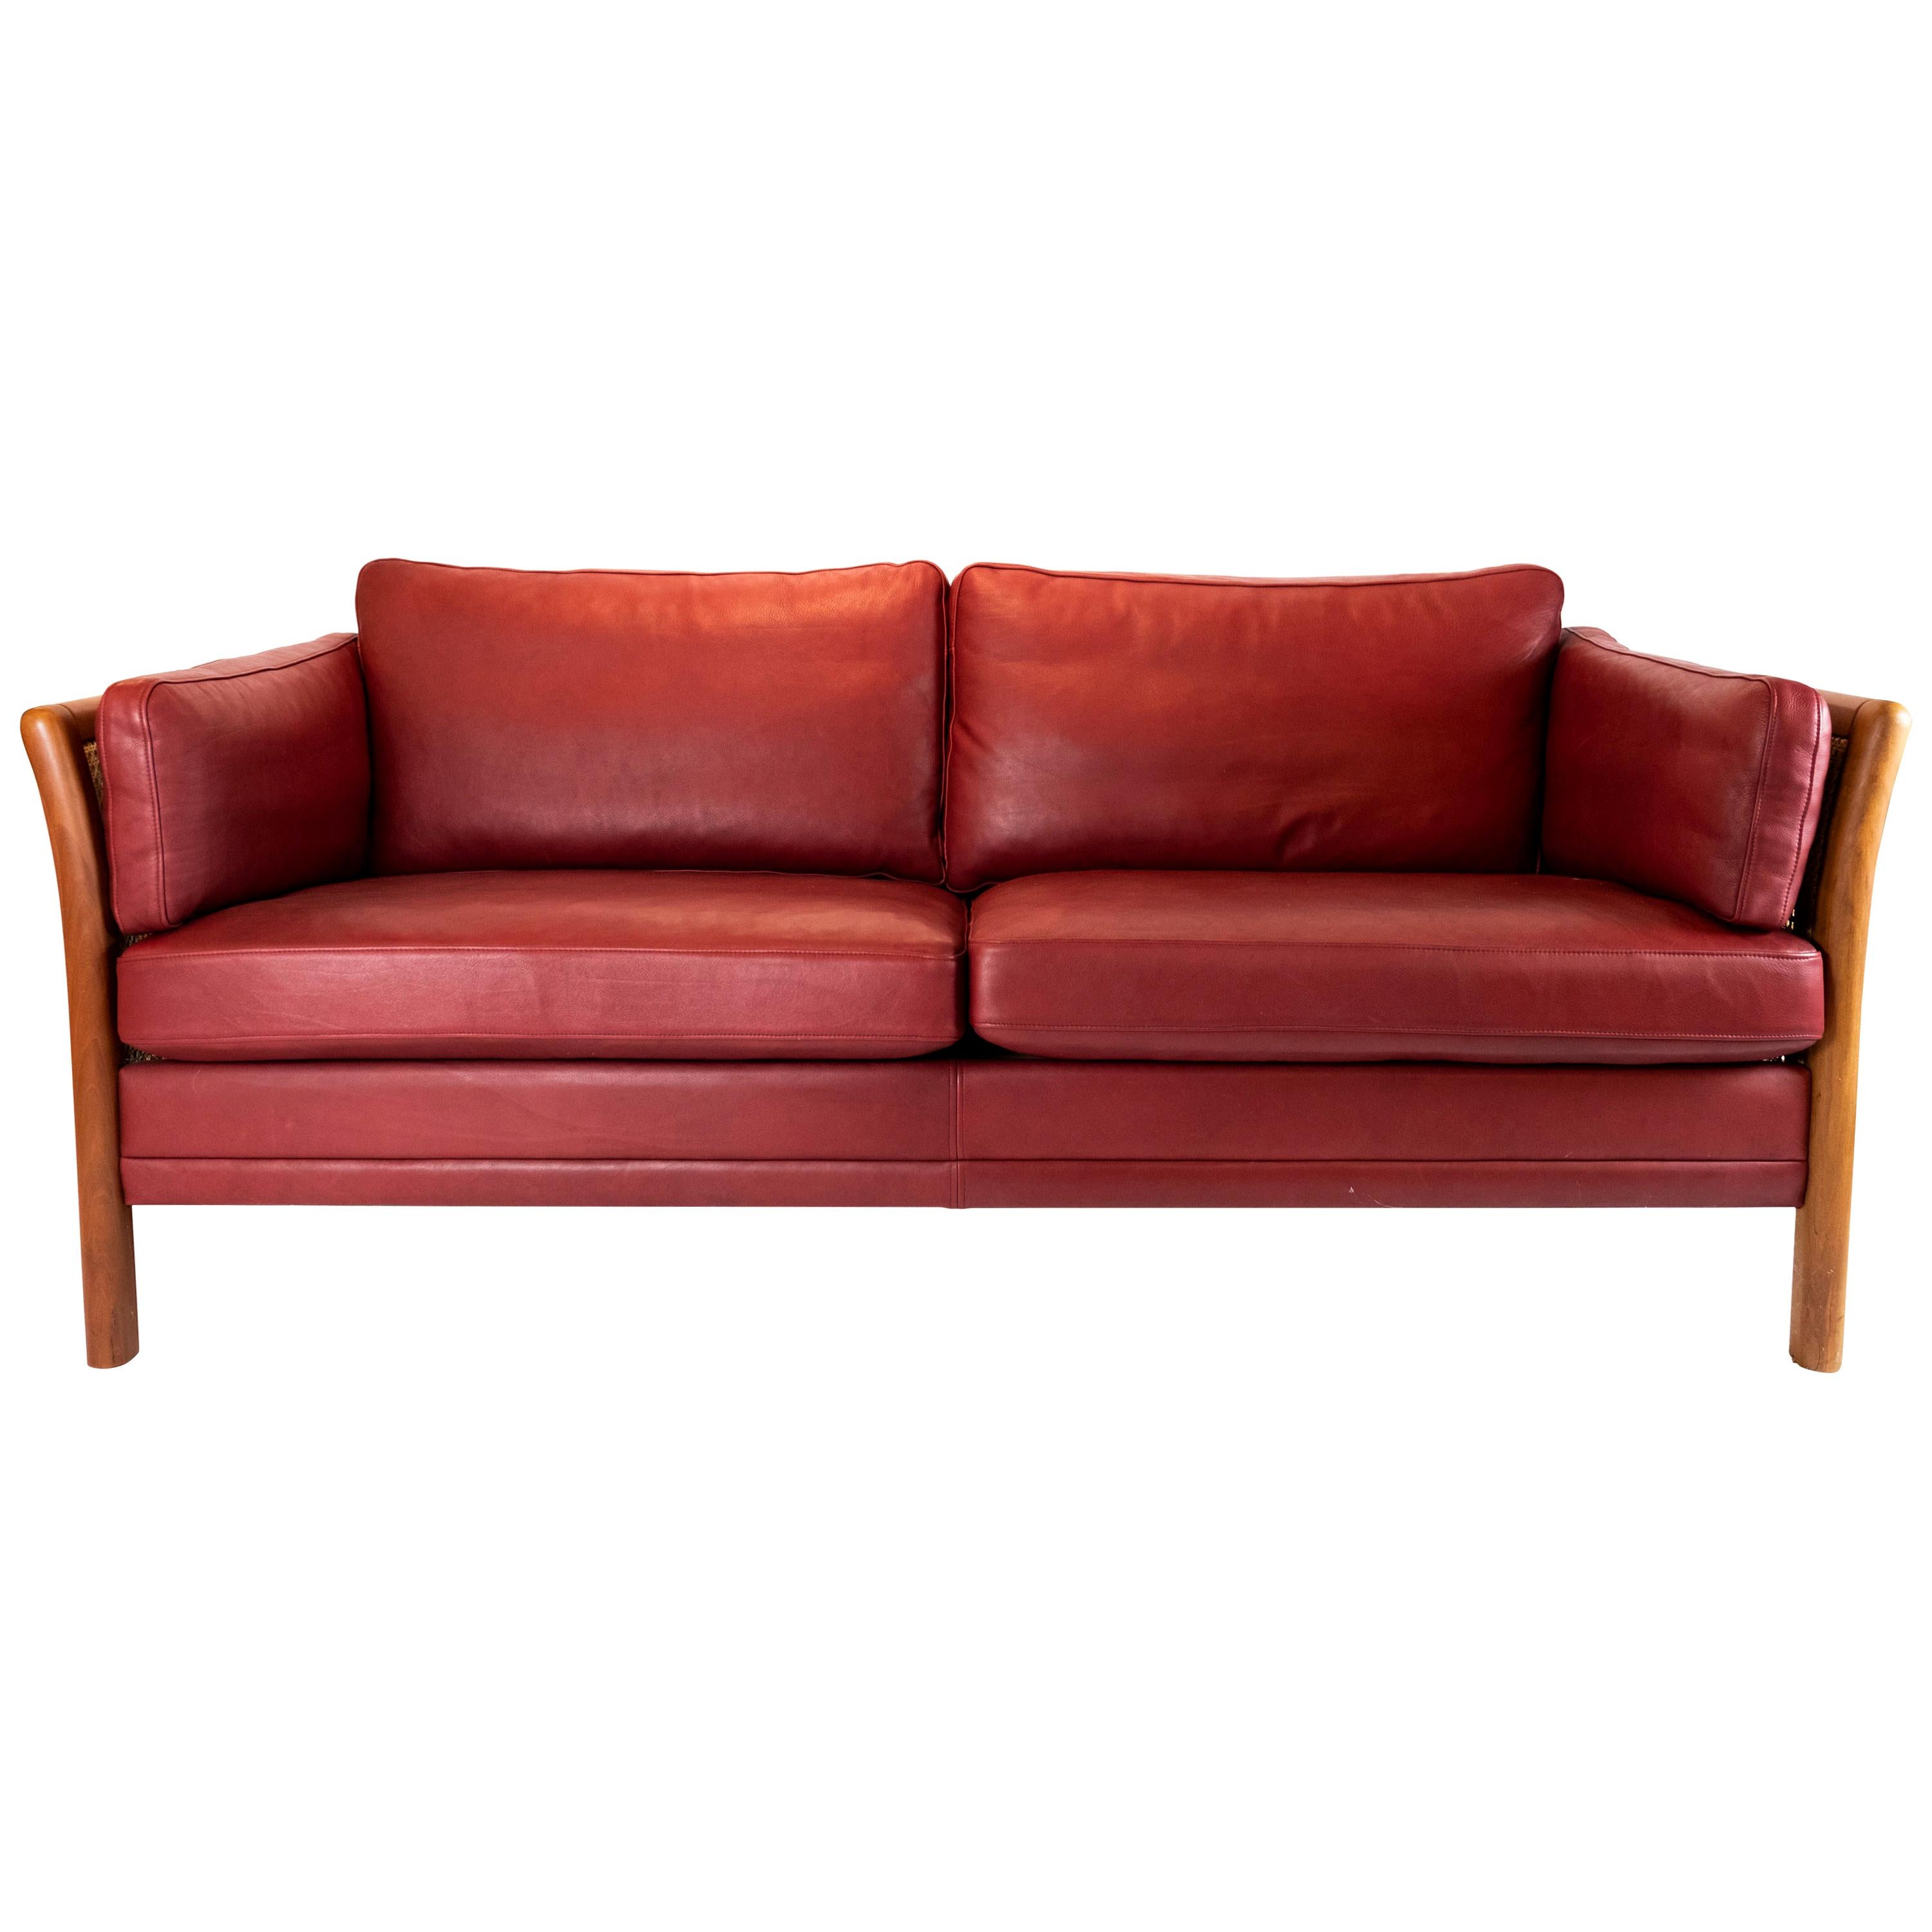 Two-Seat Sofa Upholstered with Indian Red Leather of Danish Design, 1960s